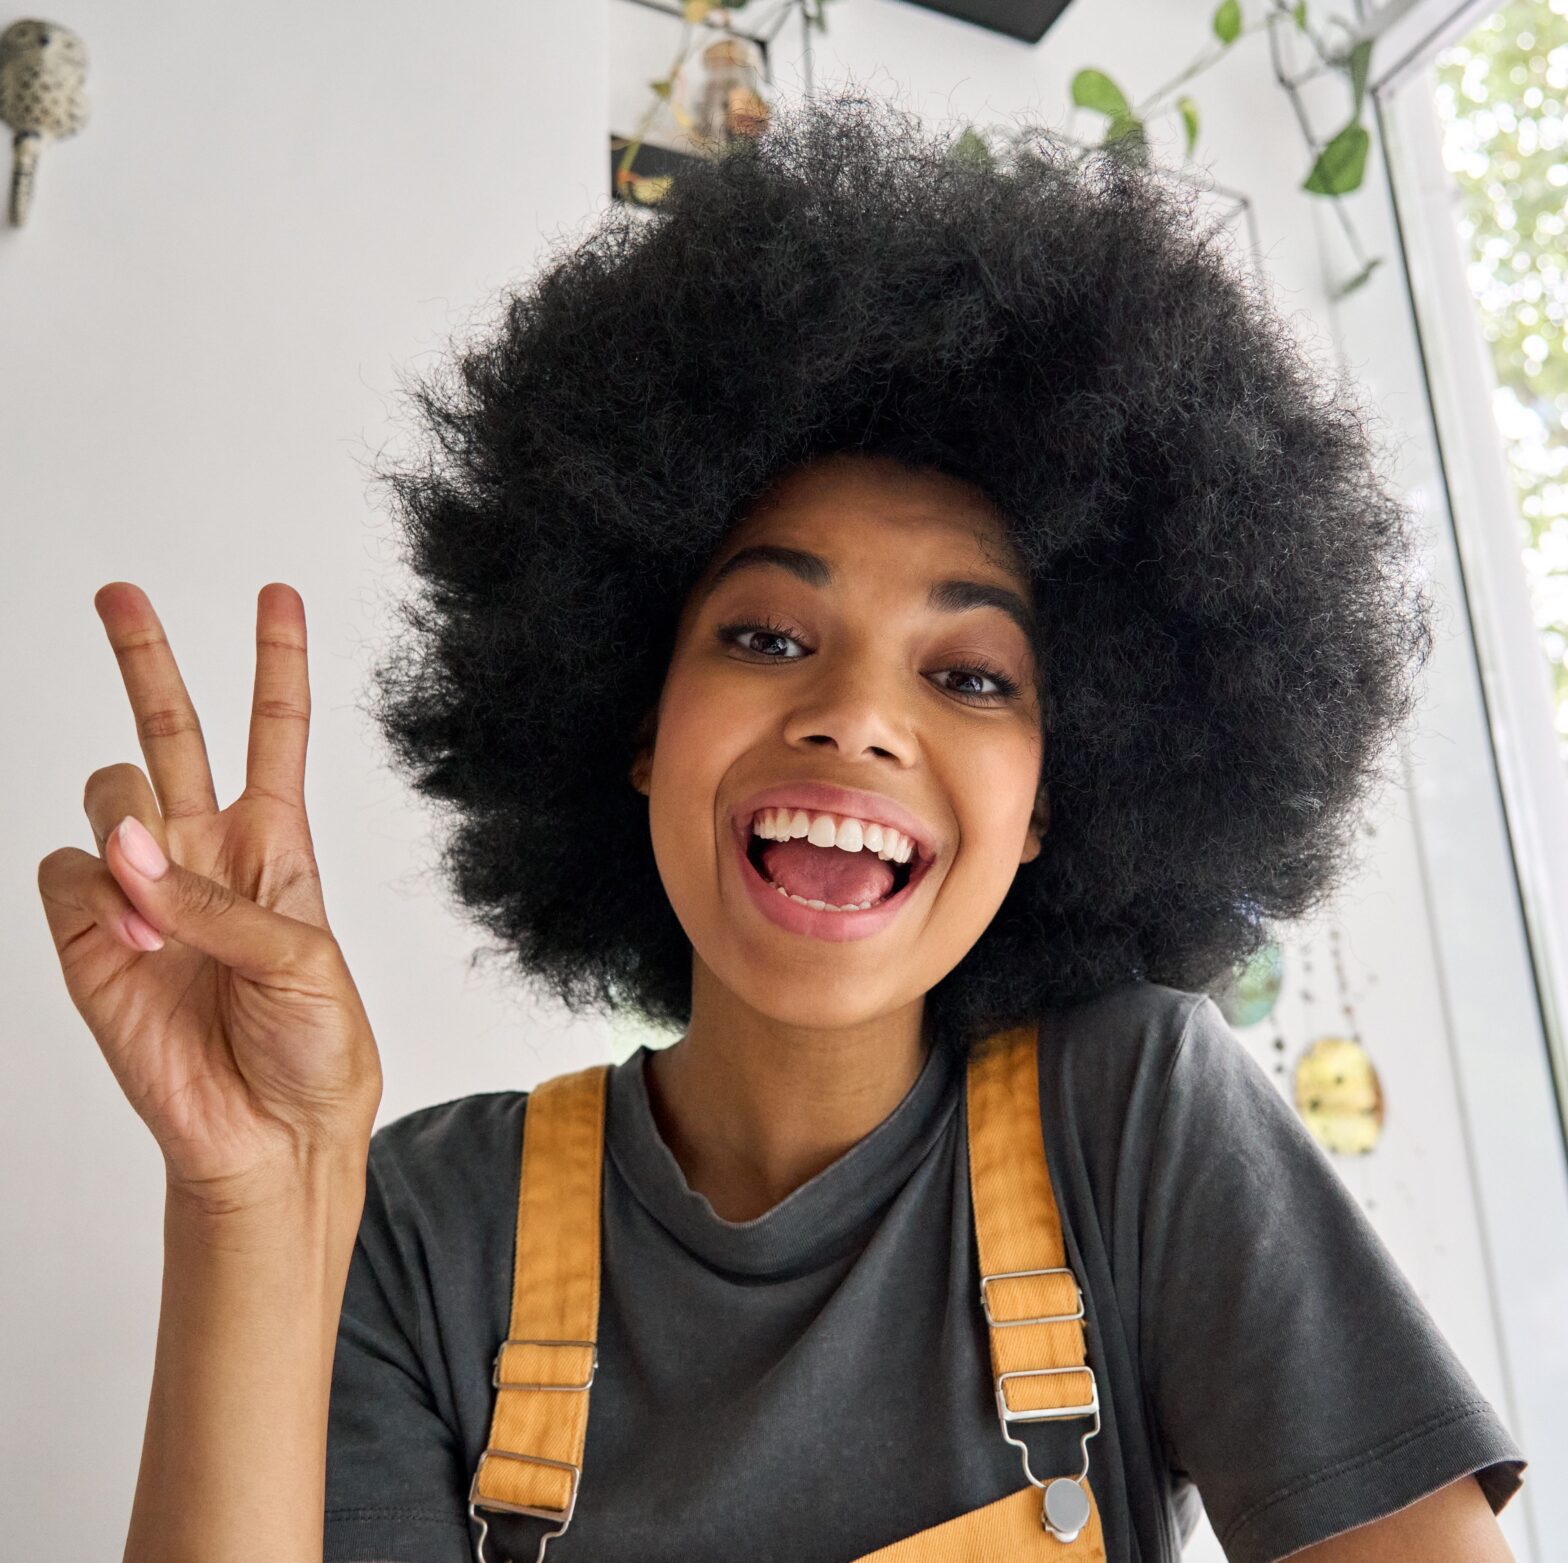 A cheerful Gen Z person with an afro hairstyle making a peace sign gesture on TikTok.